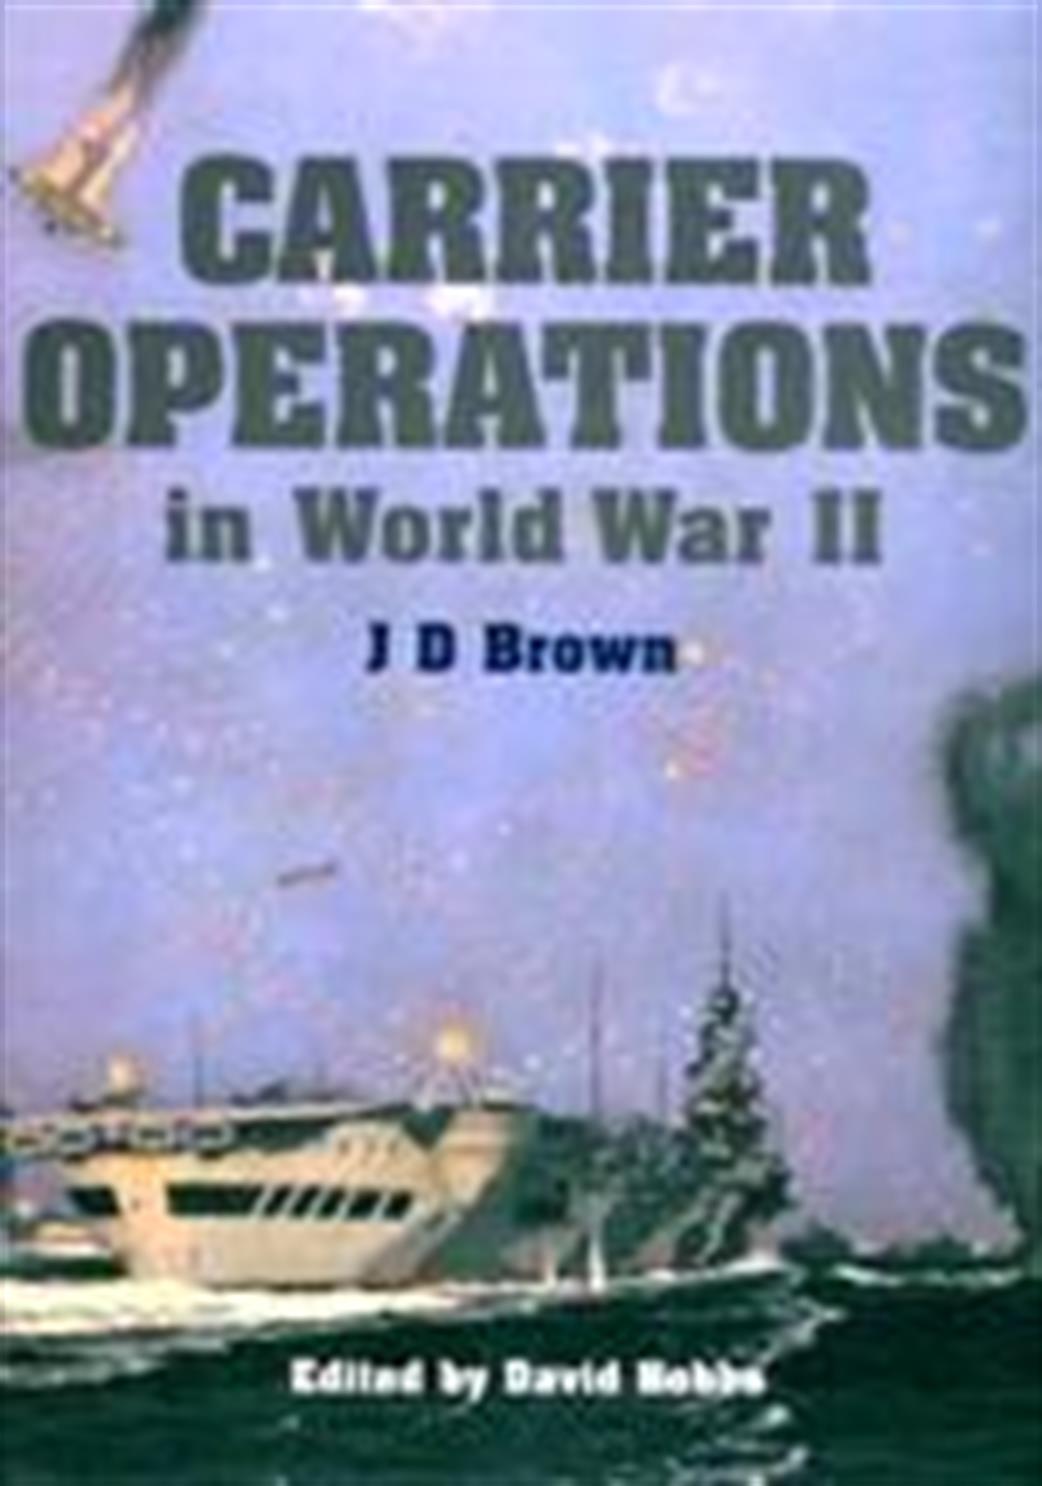 9781848320420 Carrier Operations In WW2 by J D Brown